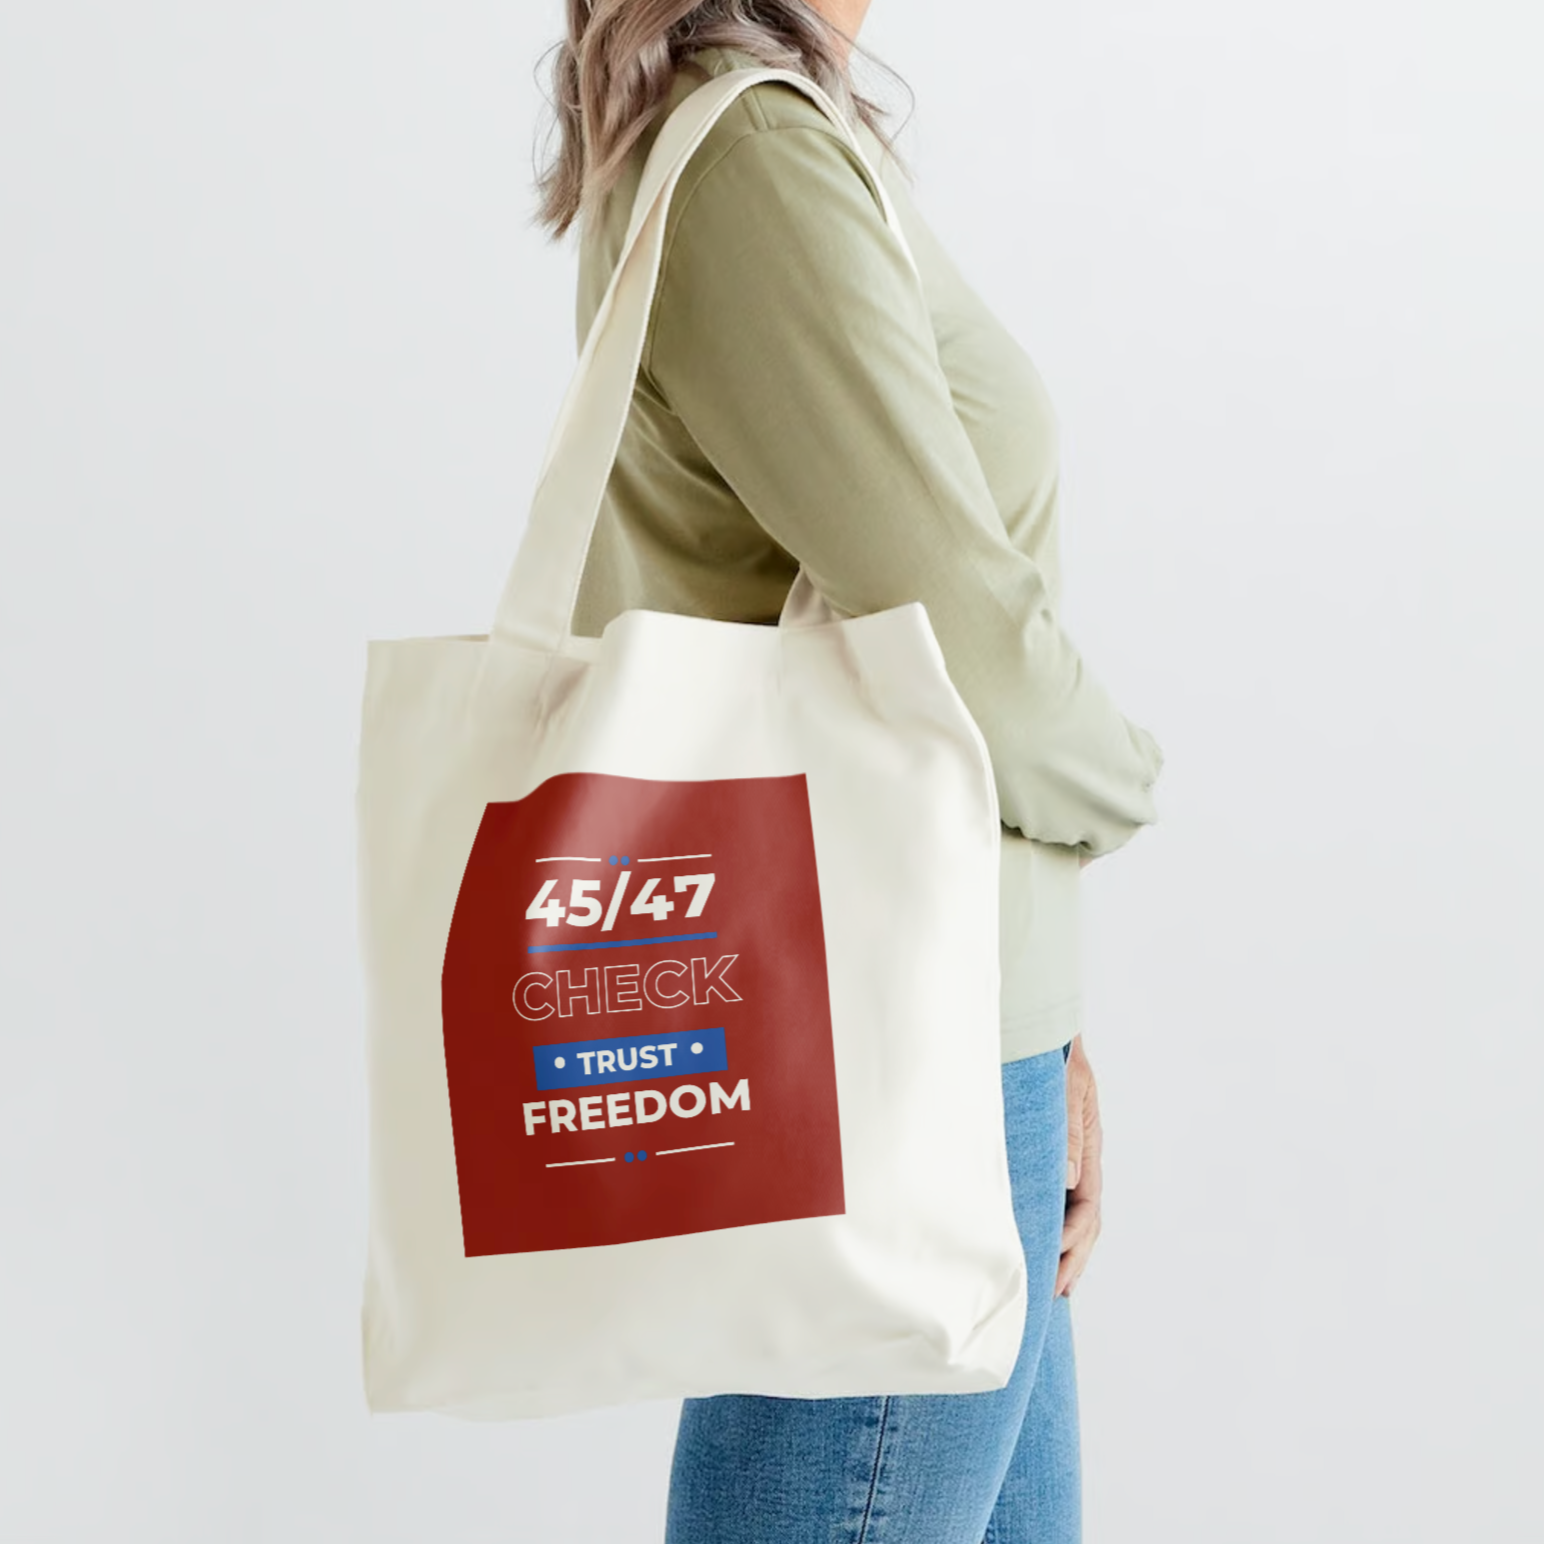 45/47 Trust Freedom All Natural Tote